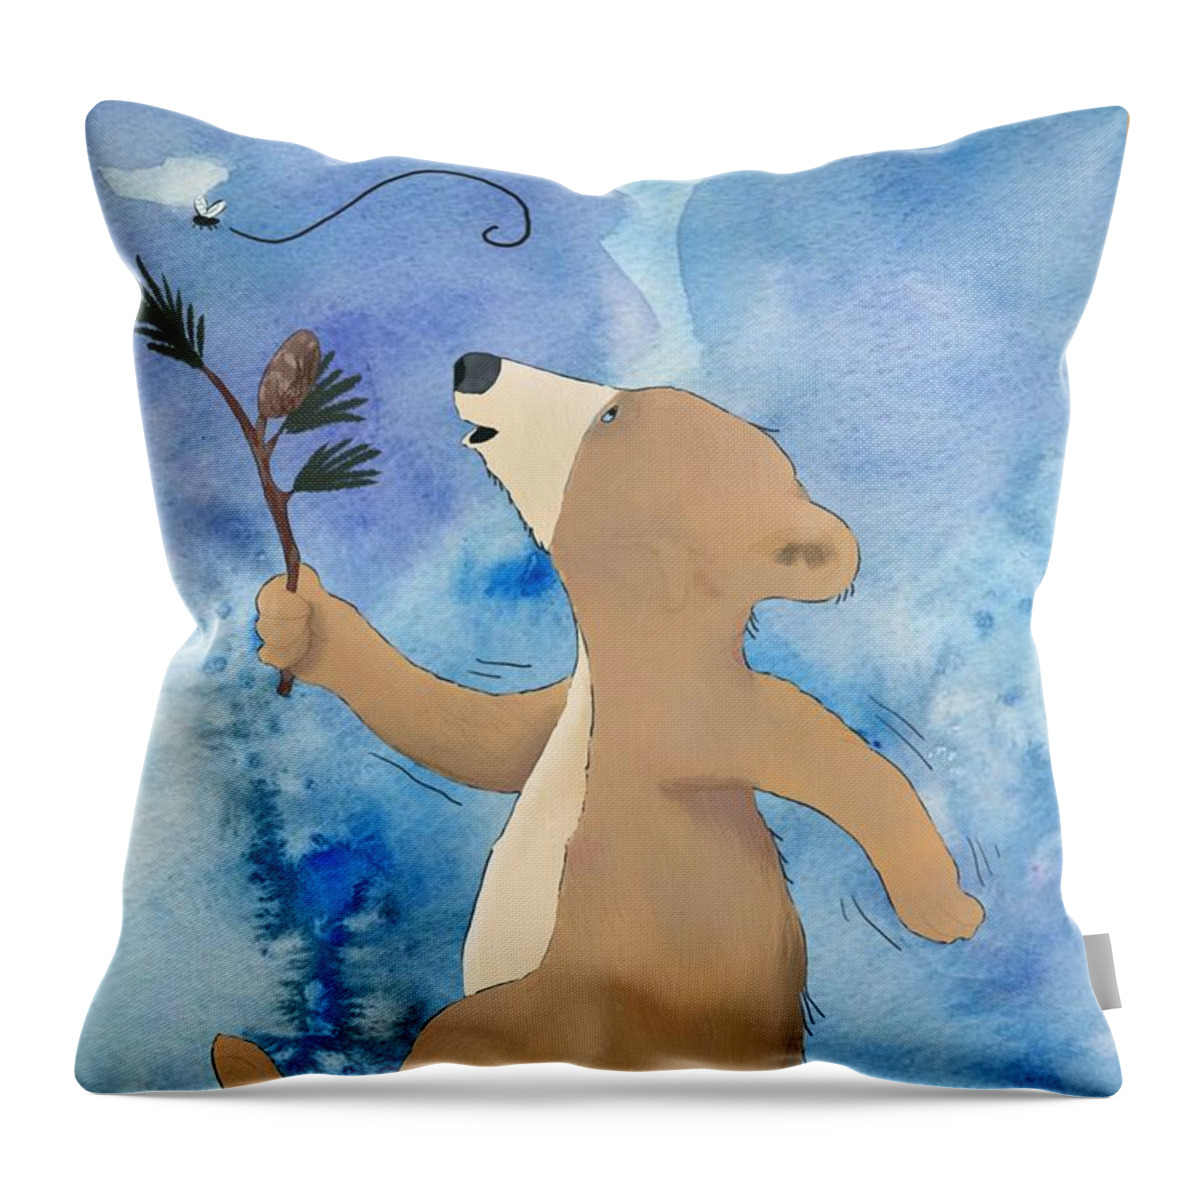 Watercolor Throw Pillow featuring the digital art Watercolor Bear by Eva Sawyer